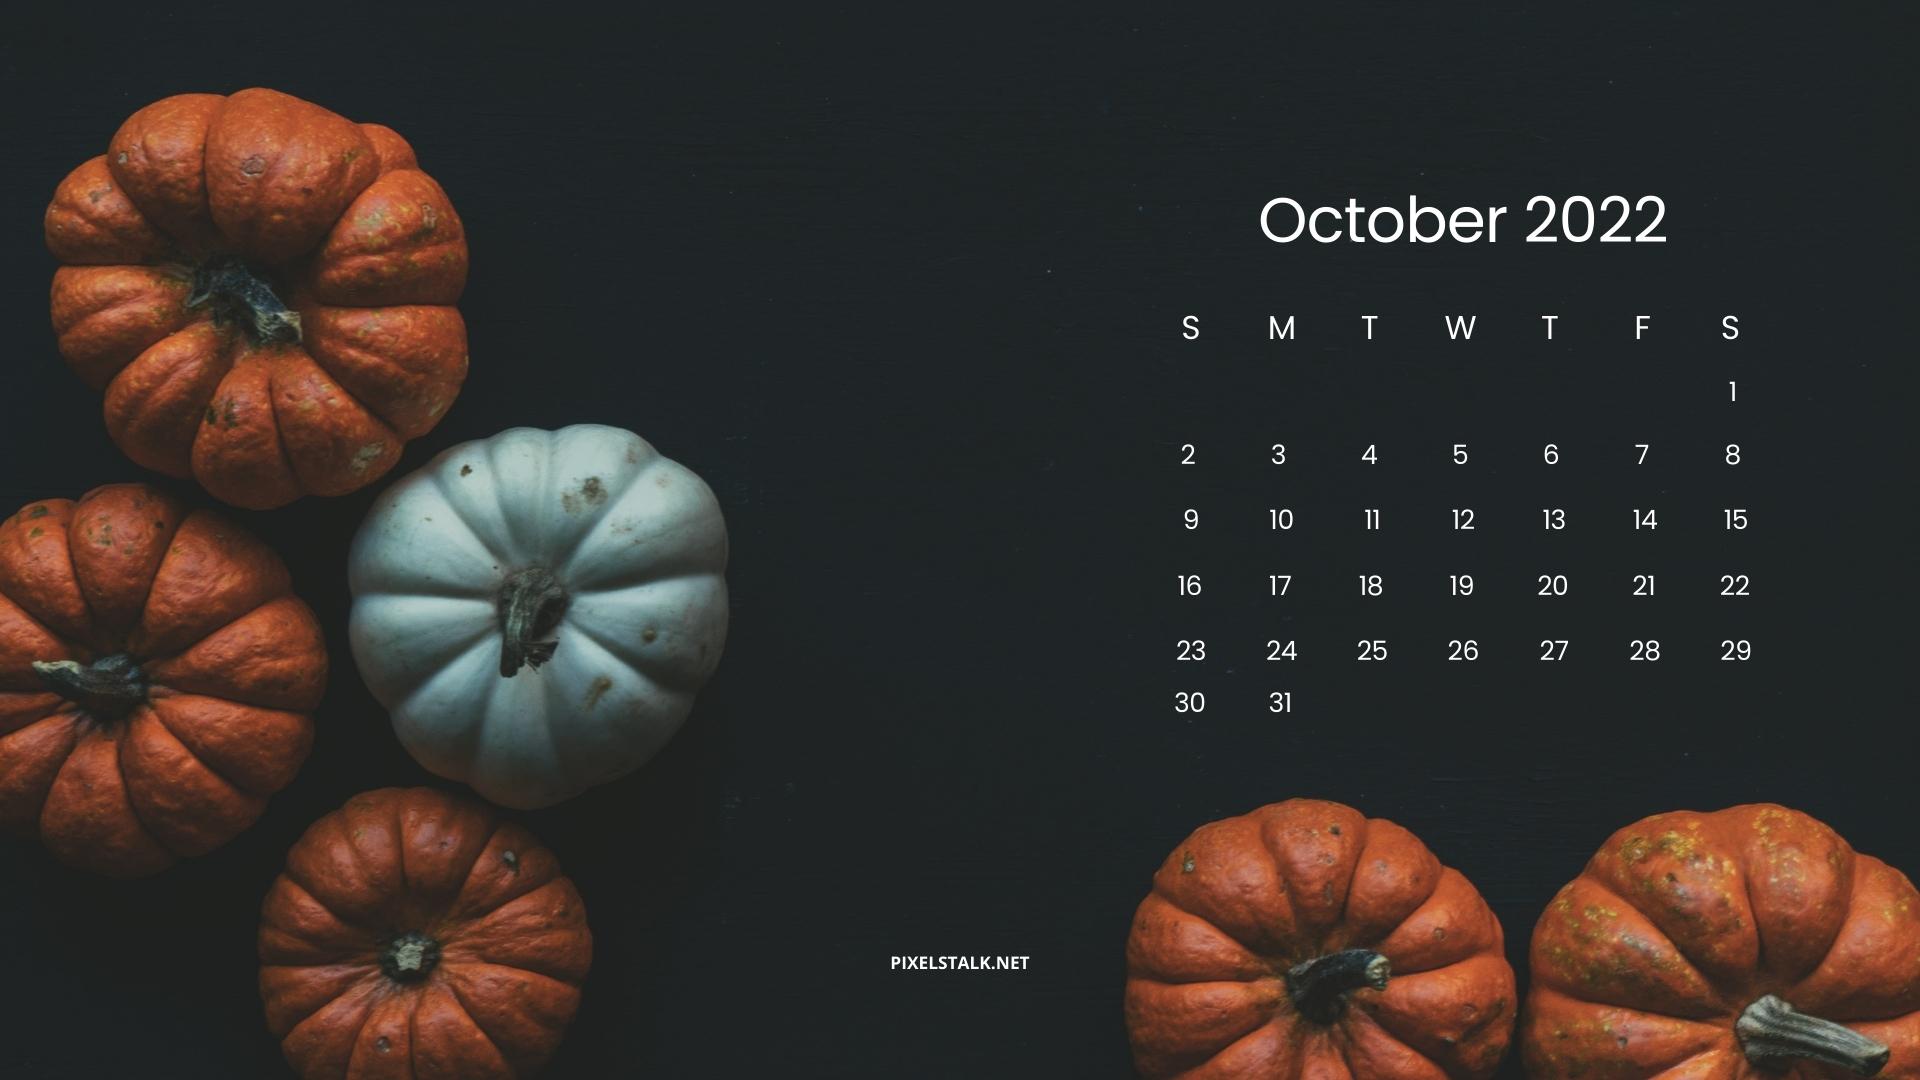 Download free psd  image of Feminine 2022 October calendar template  monthly planner psd by Sasi   October calendar Monthly calendar  template Calendar template